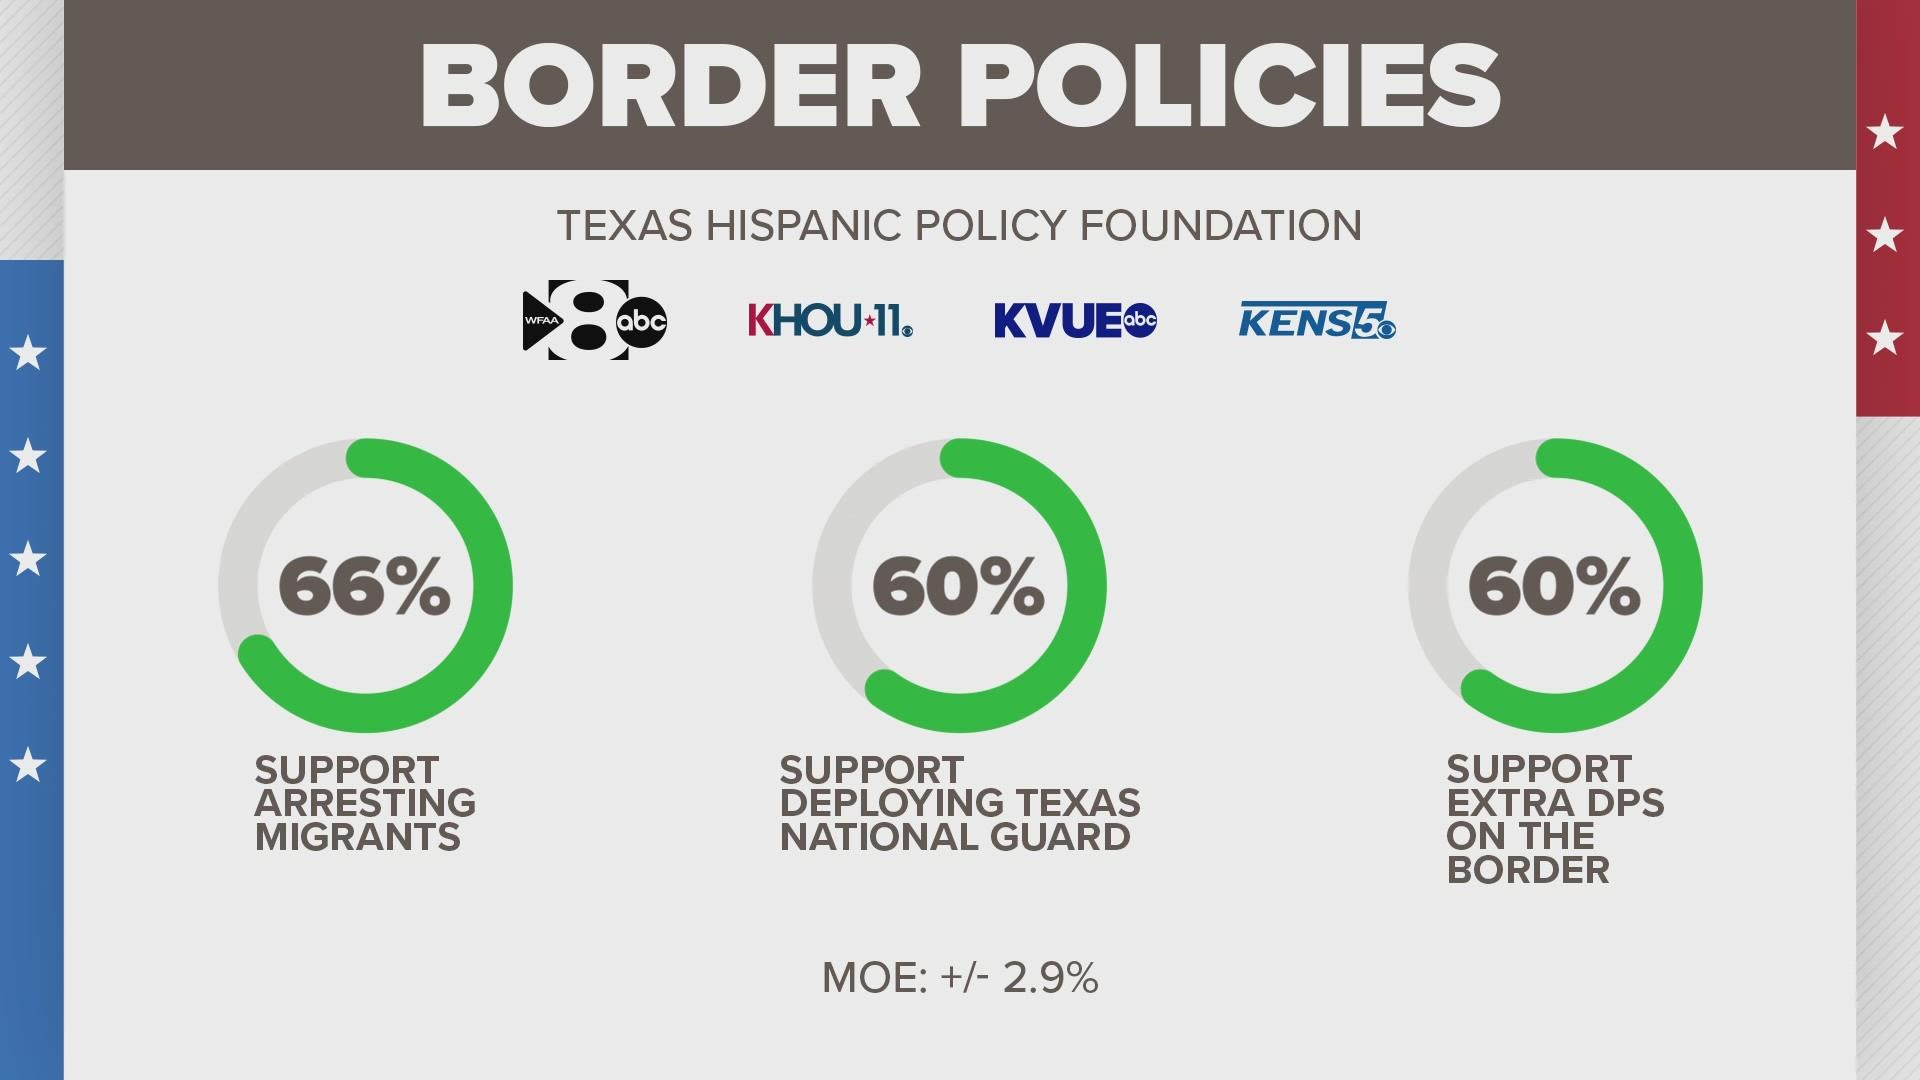 Part 2 of WFAA's three-part survey shows how likely Texas voters feel about border policies and which direction the state is heading.